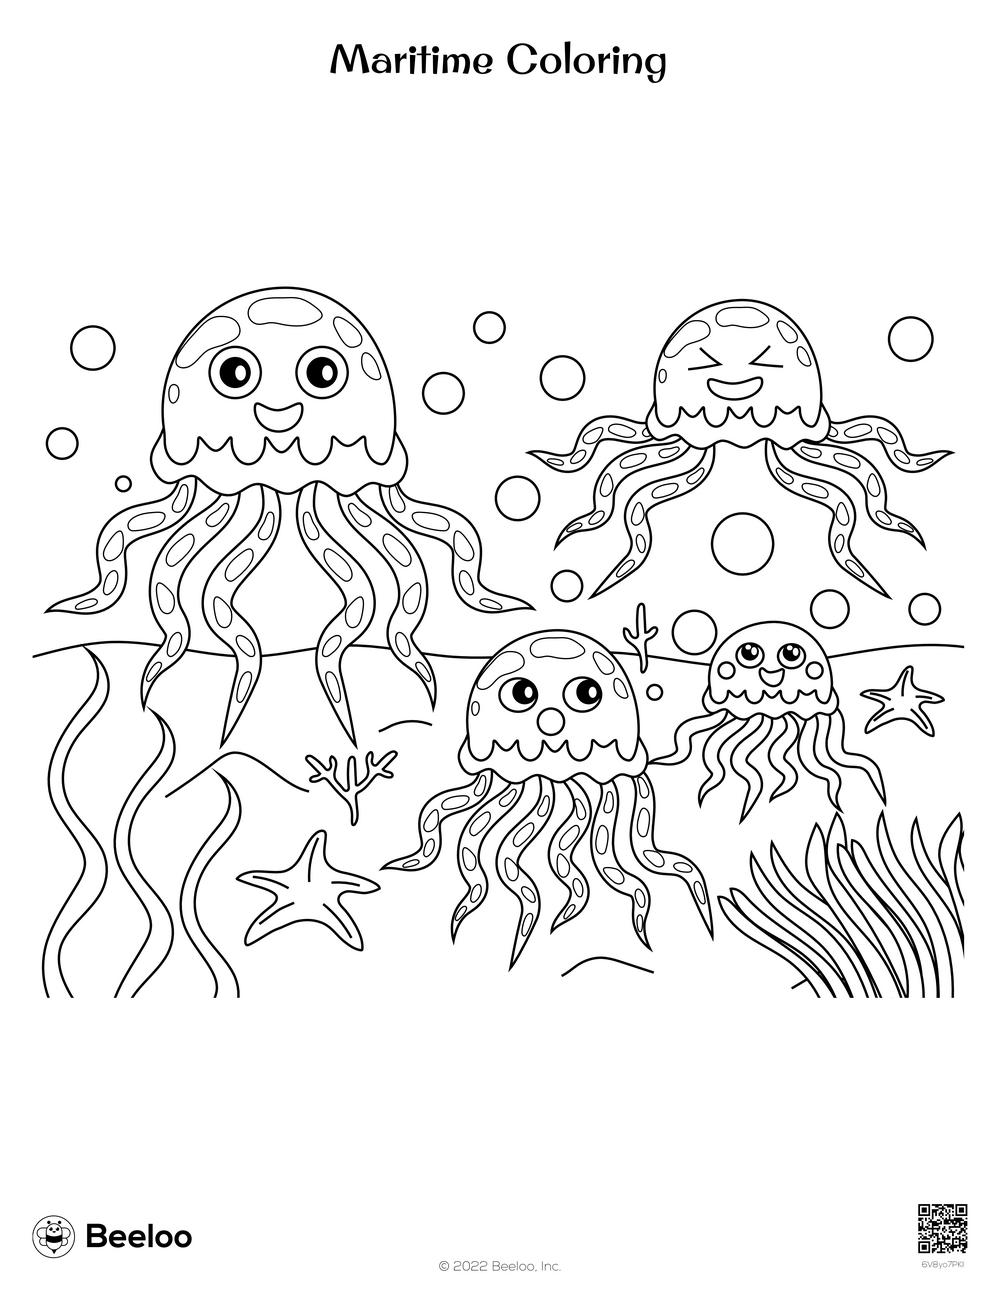 195 Jellyfish Coloring Page Designs: Underwater Beauty in Color 170